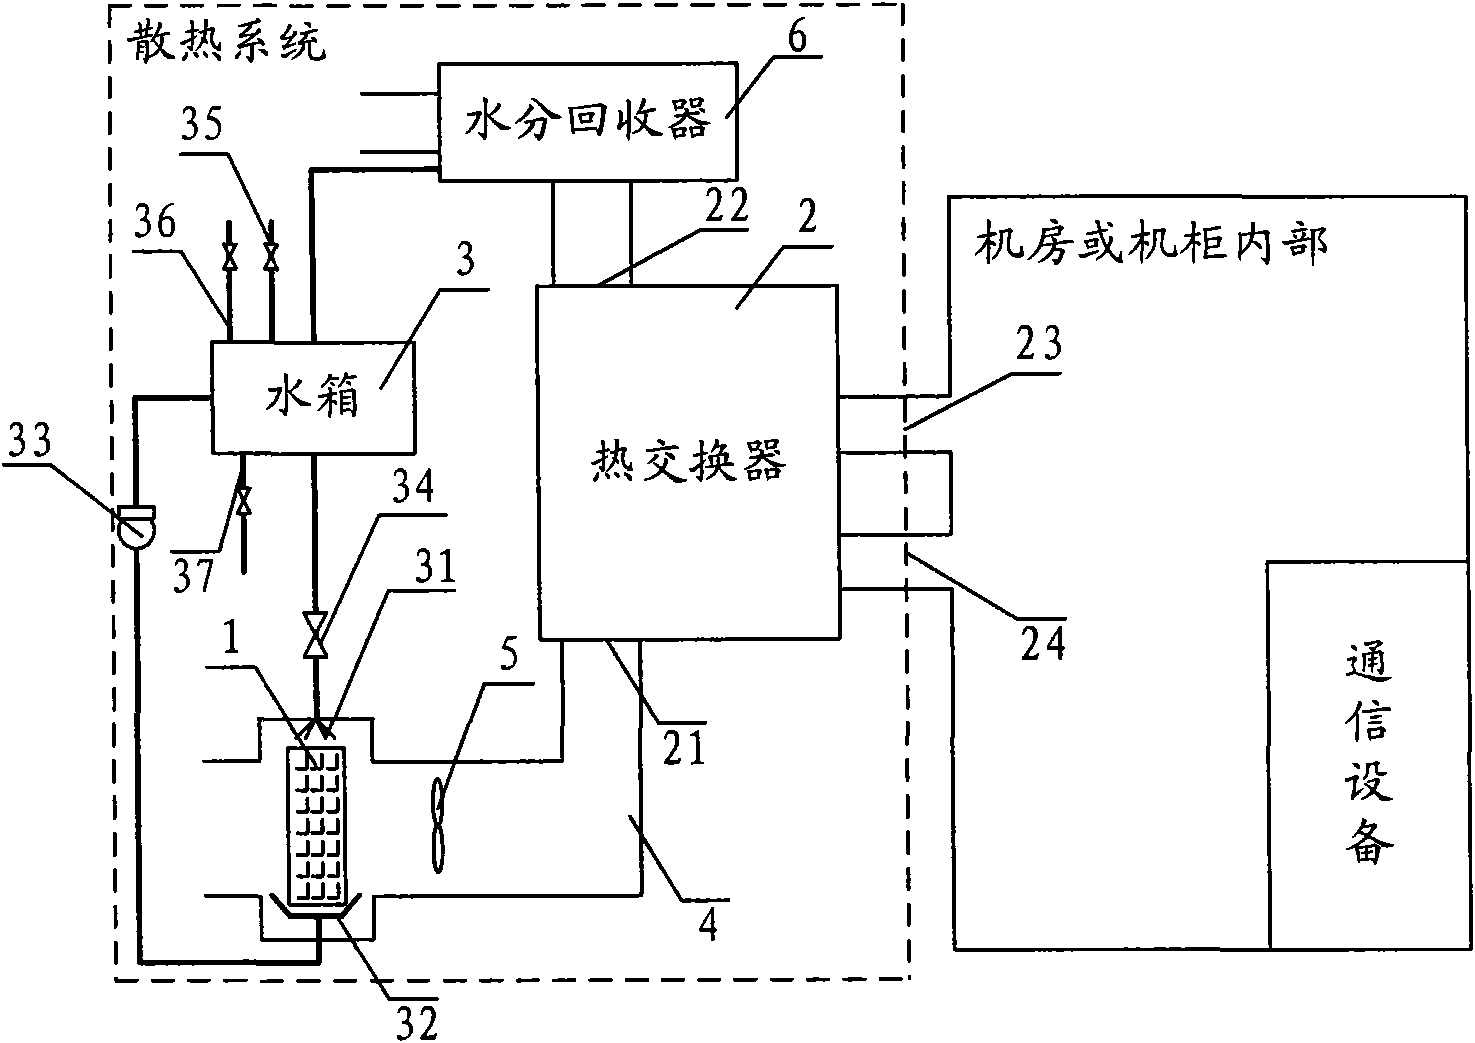 Cooling system and communication system